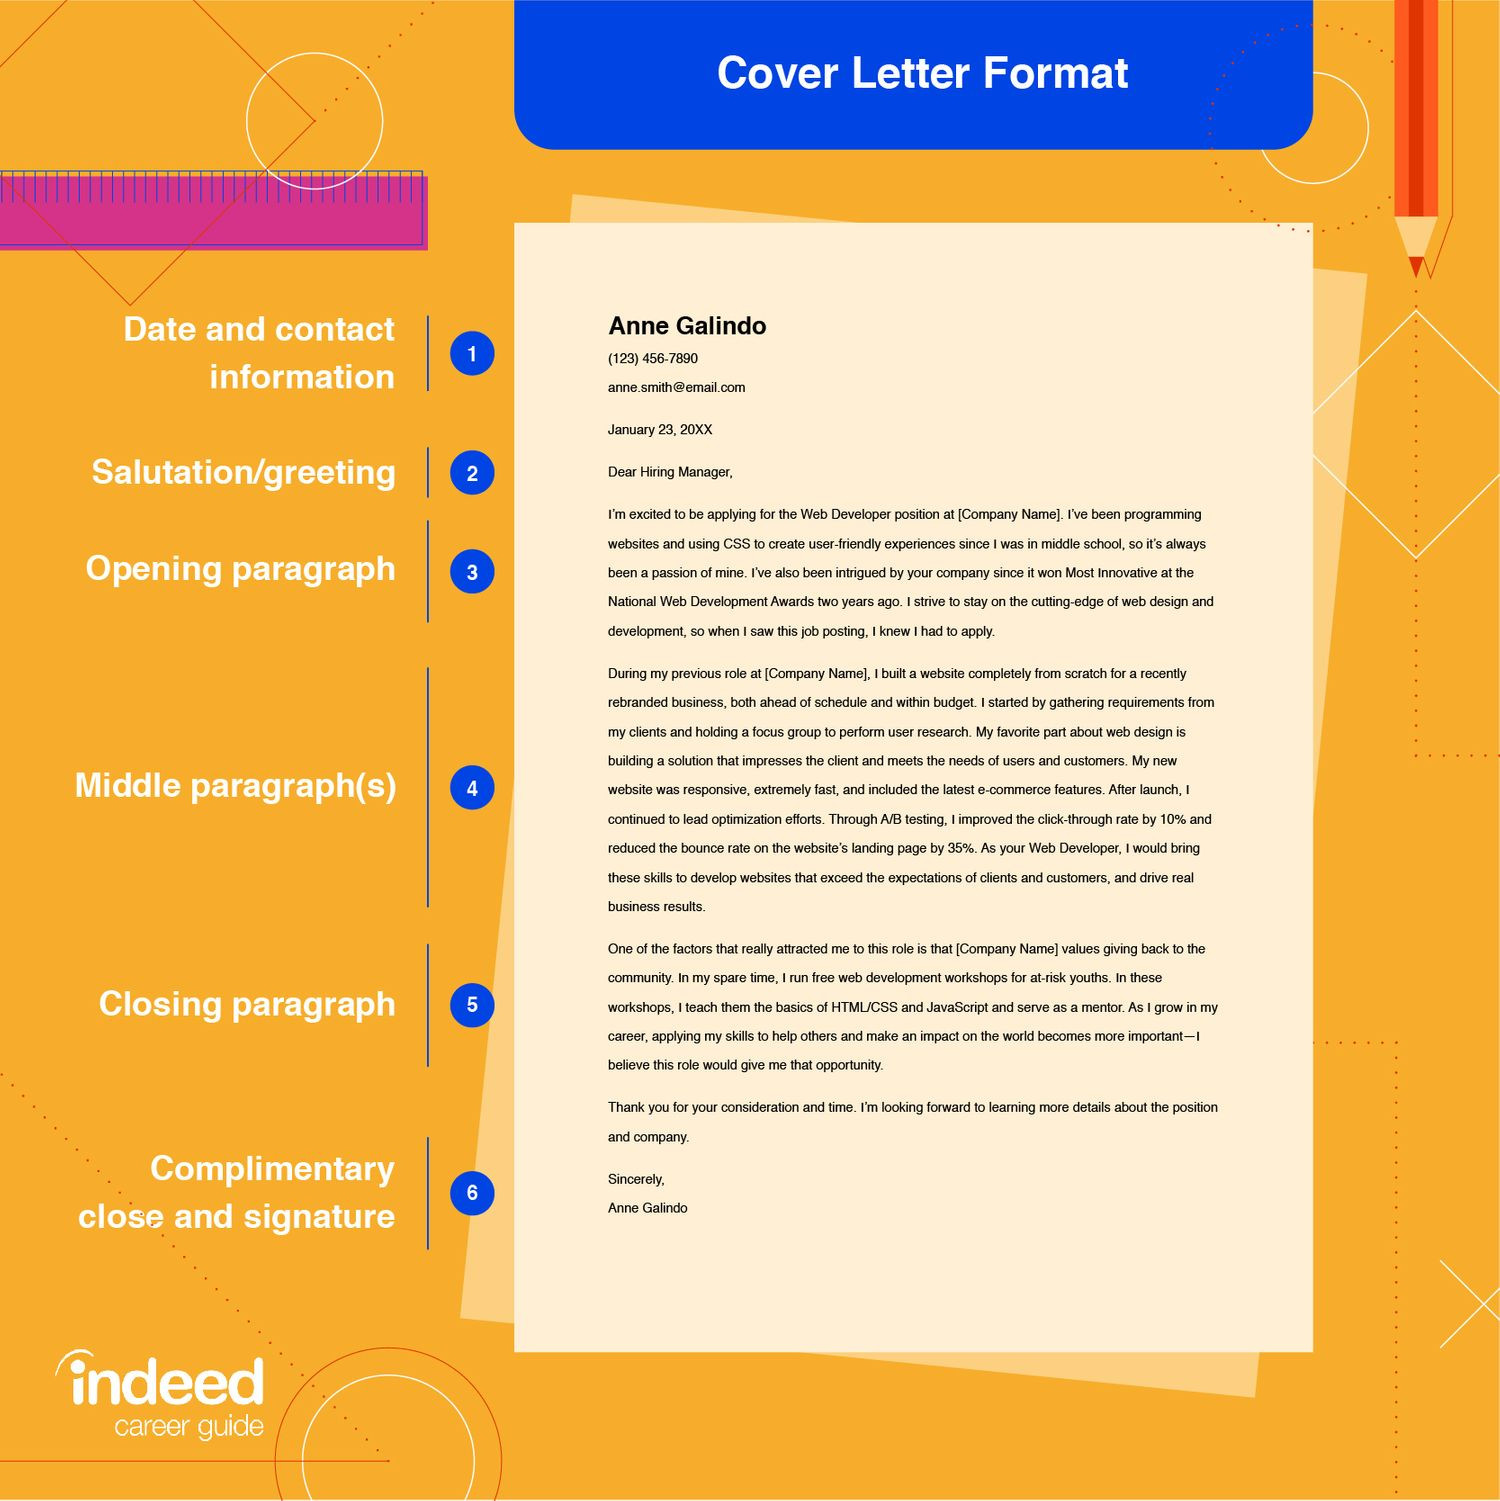 Email Cover Letter and Resume Sample to Recruiter How to Send An Email Cover Letter (with Example) Indeed.com